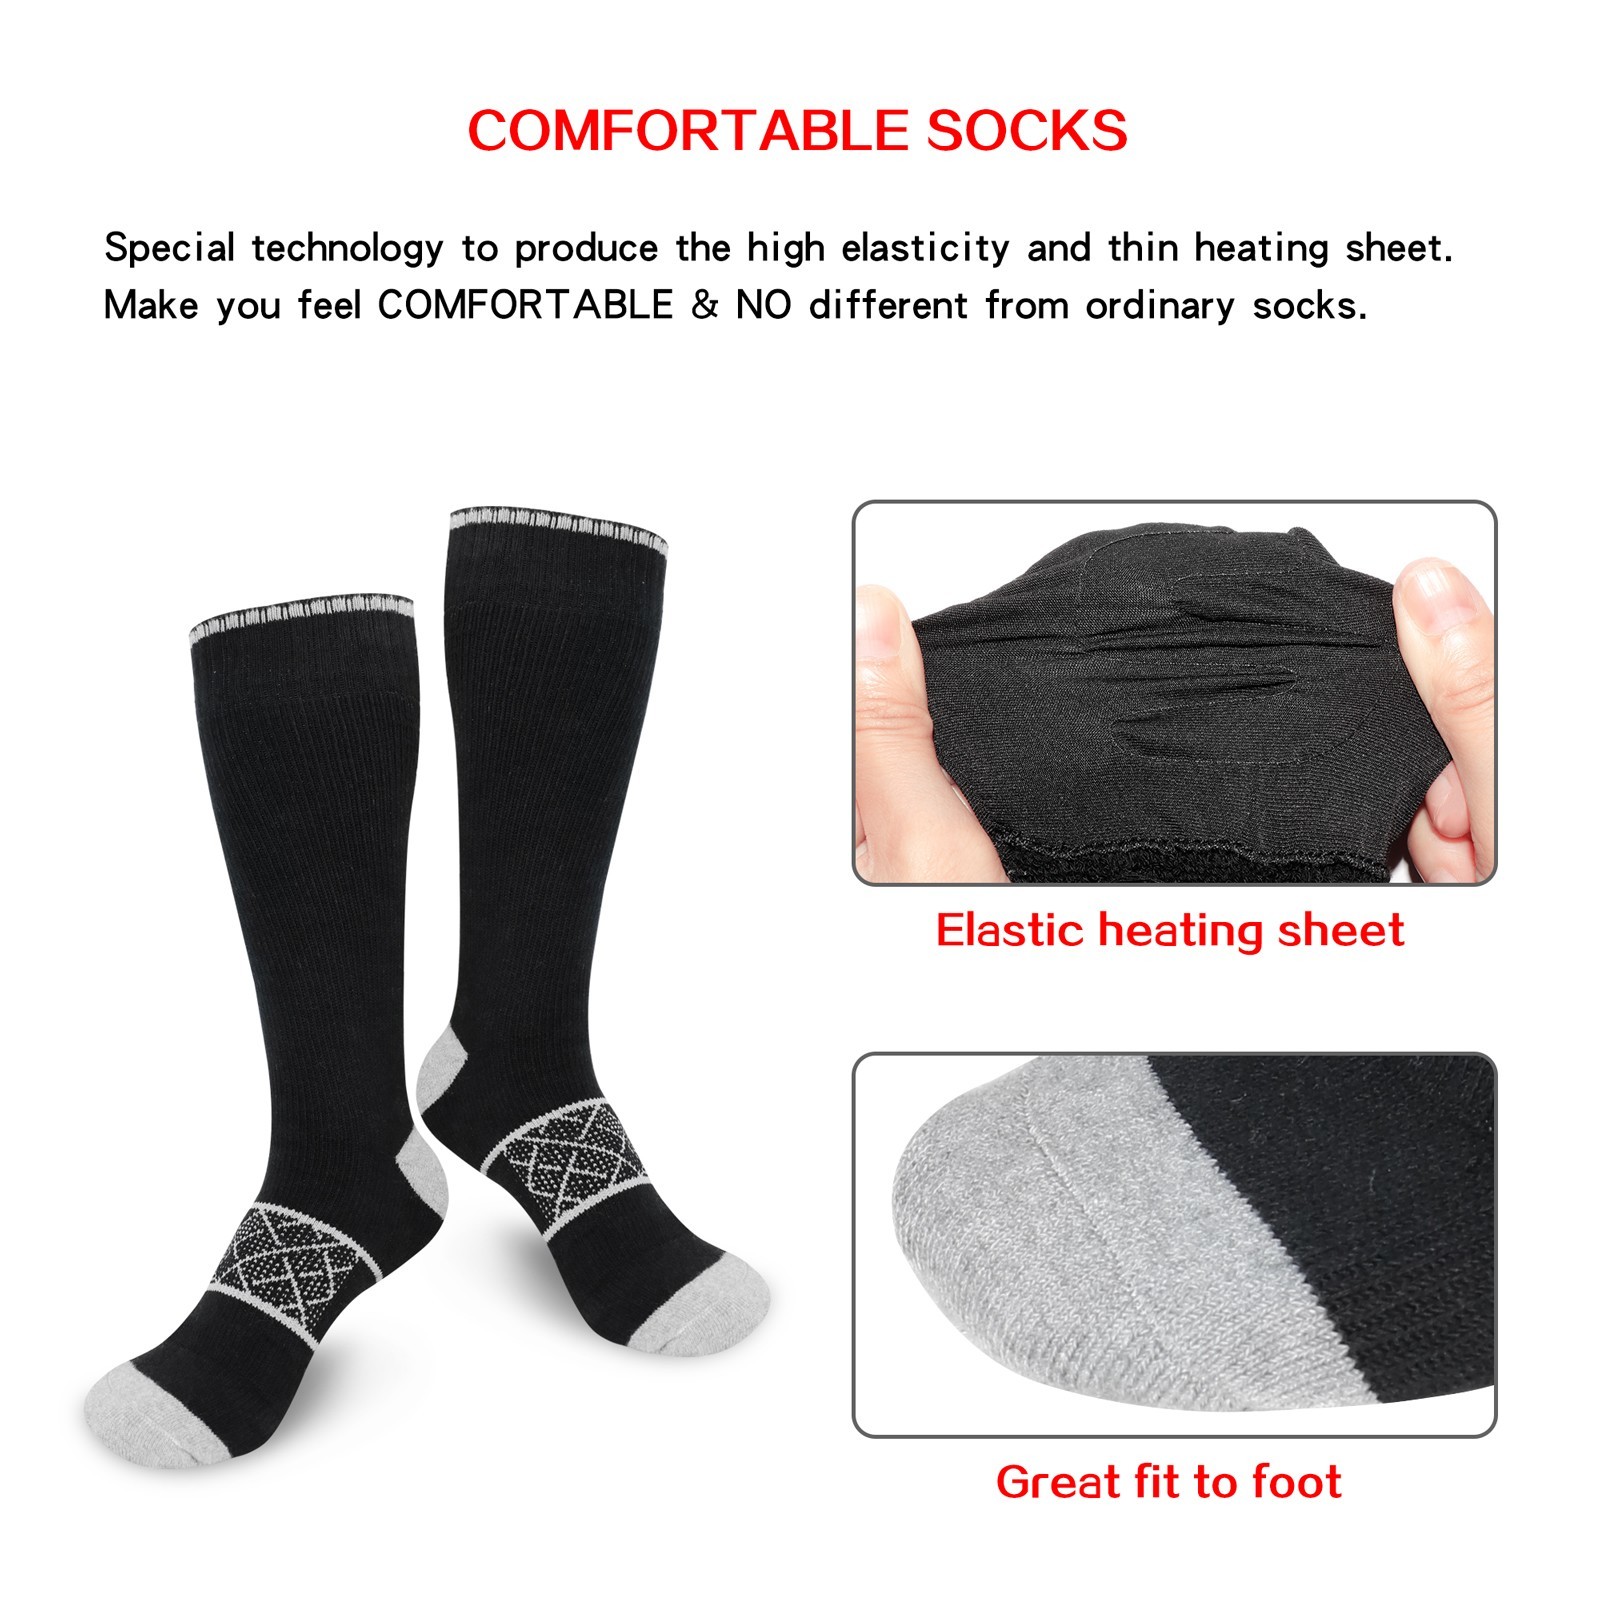 Dr. Warm cotton battery operated warming socks with smart design for home